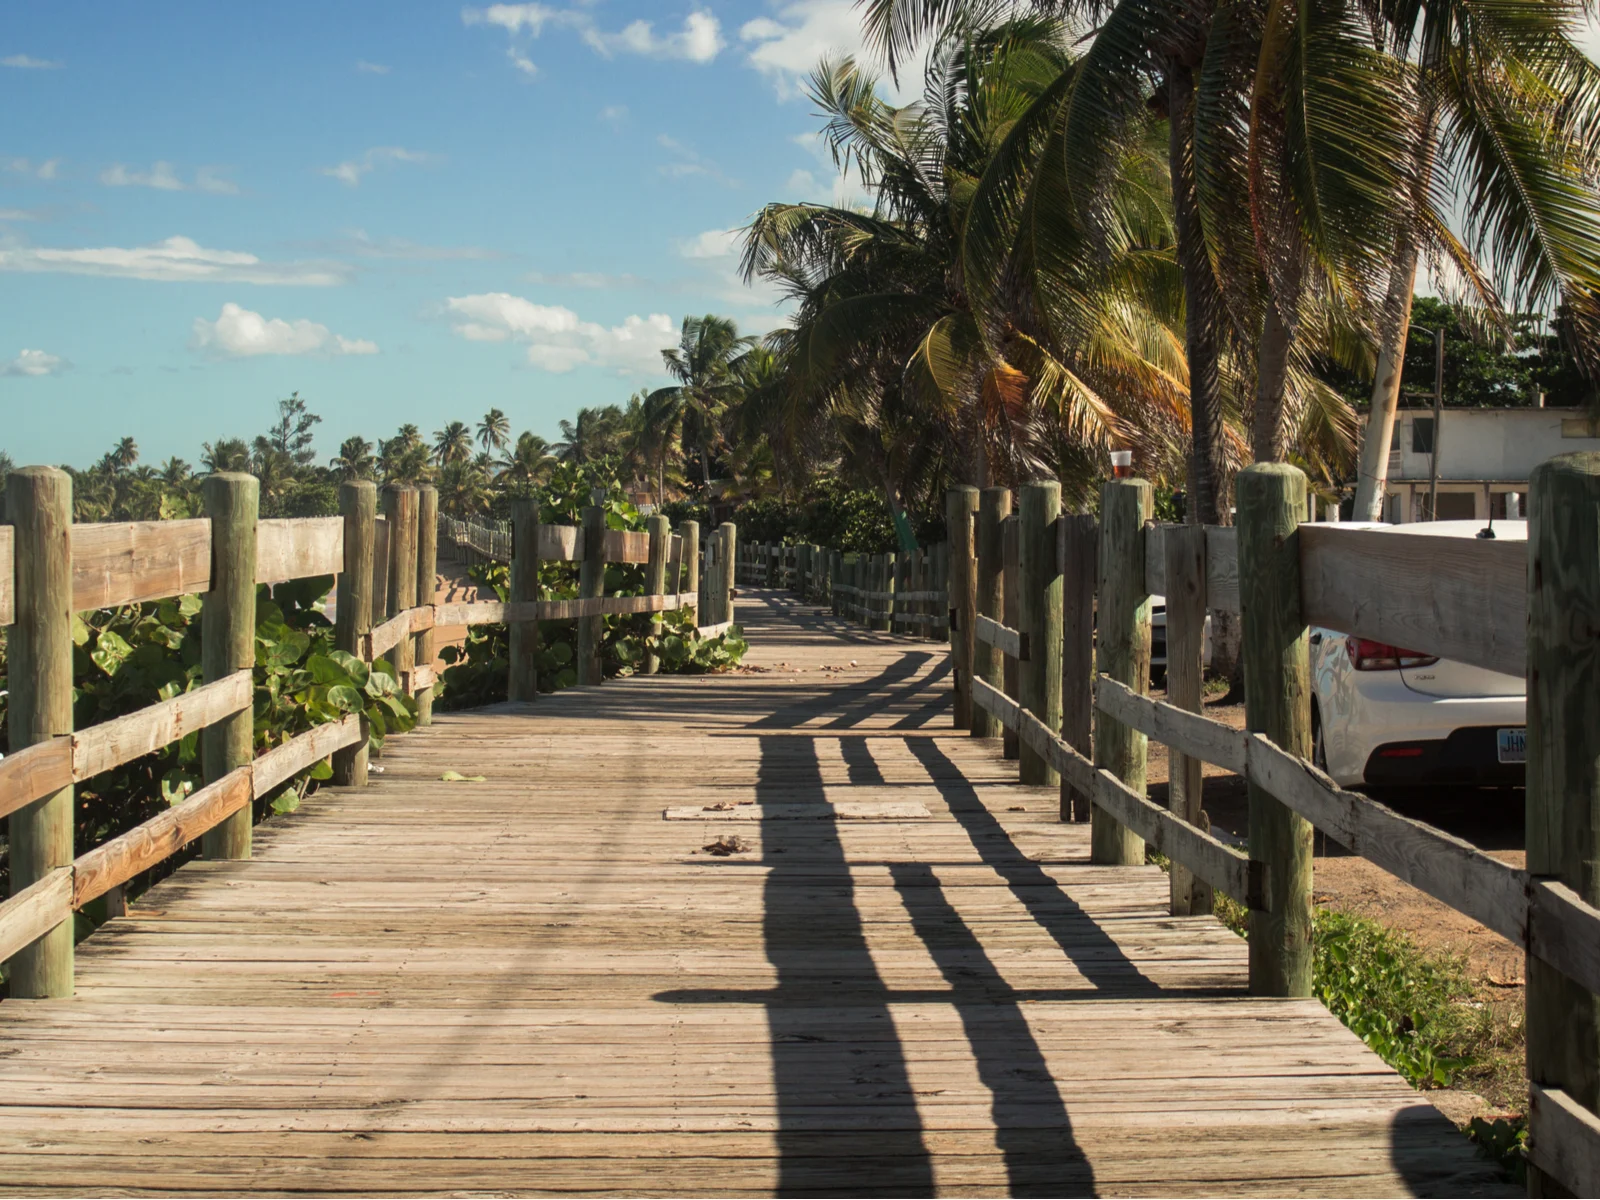 An empty wooden foot bridge of Piñones is one of the best things to do in Puerto Rico, leading towards tall palm trees